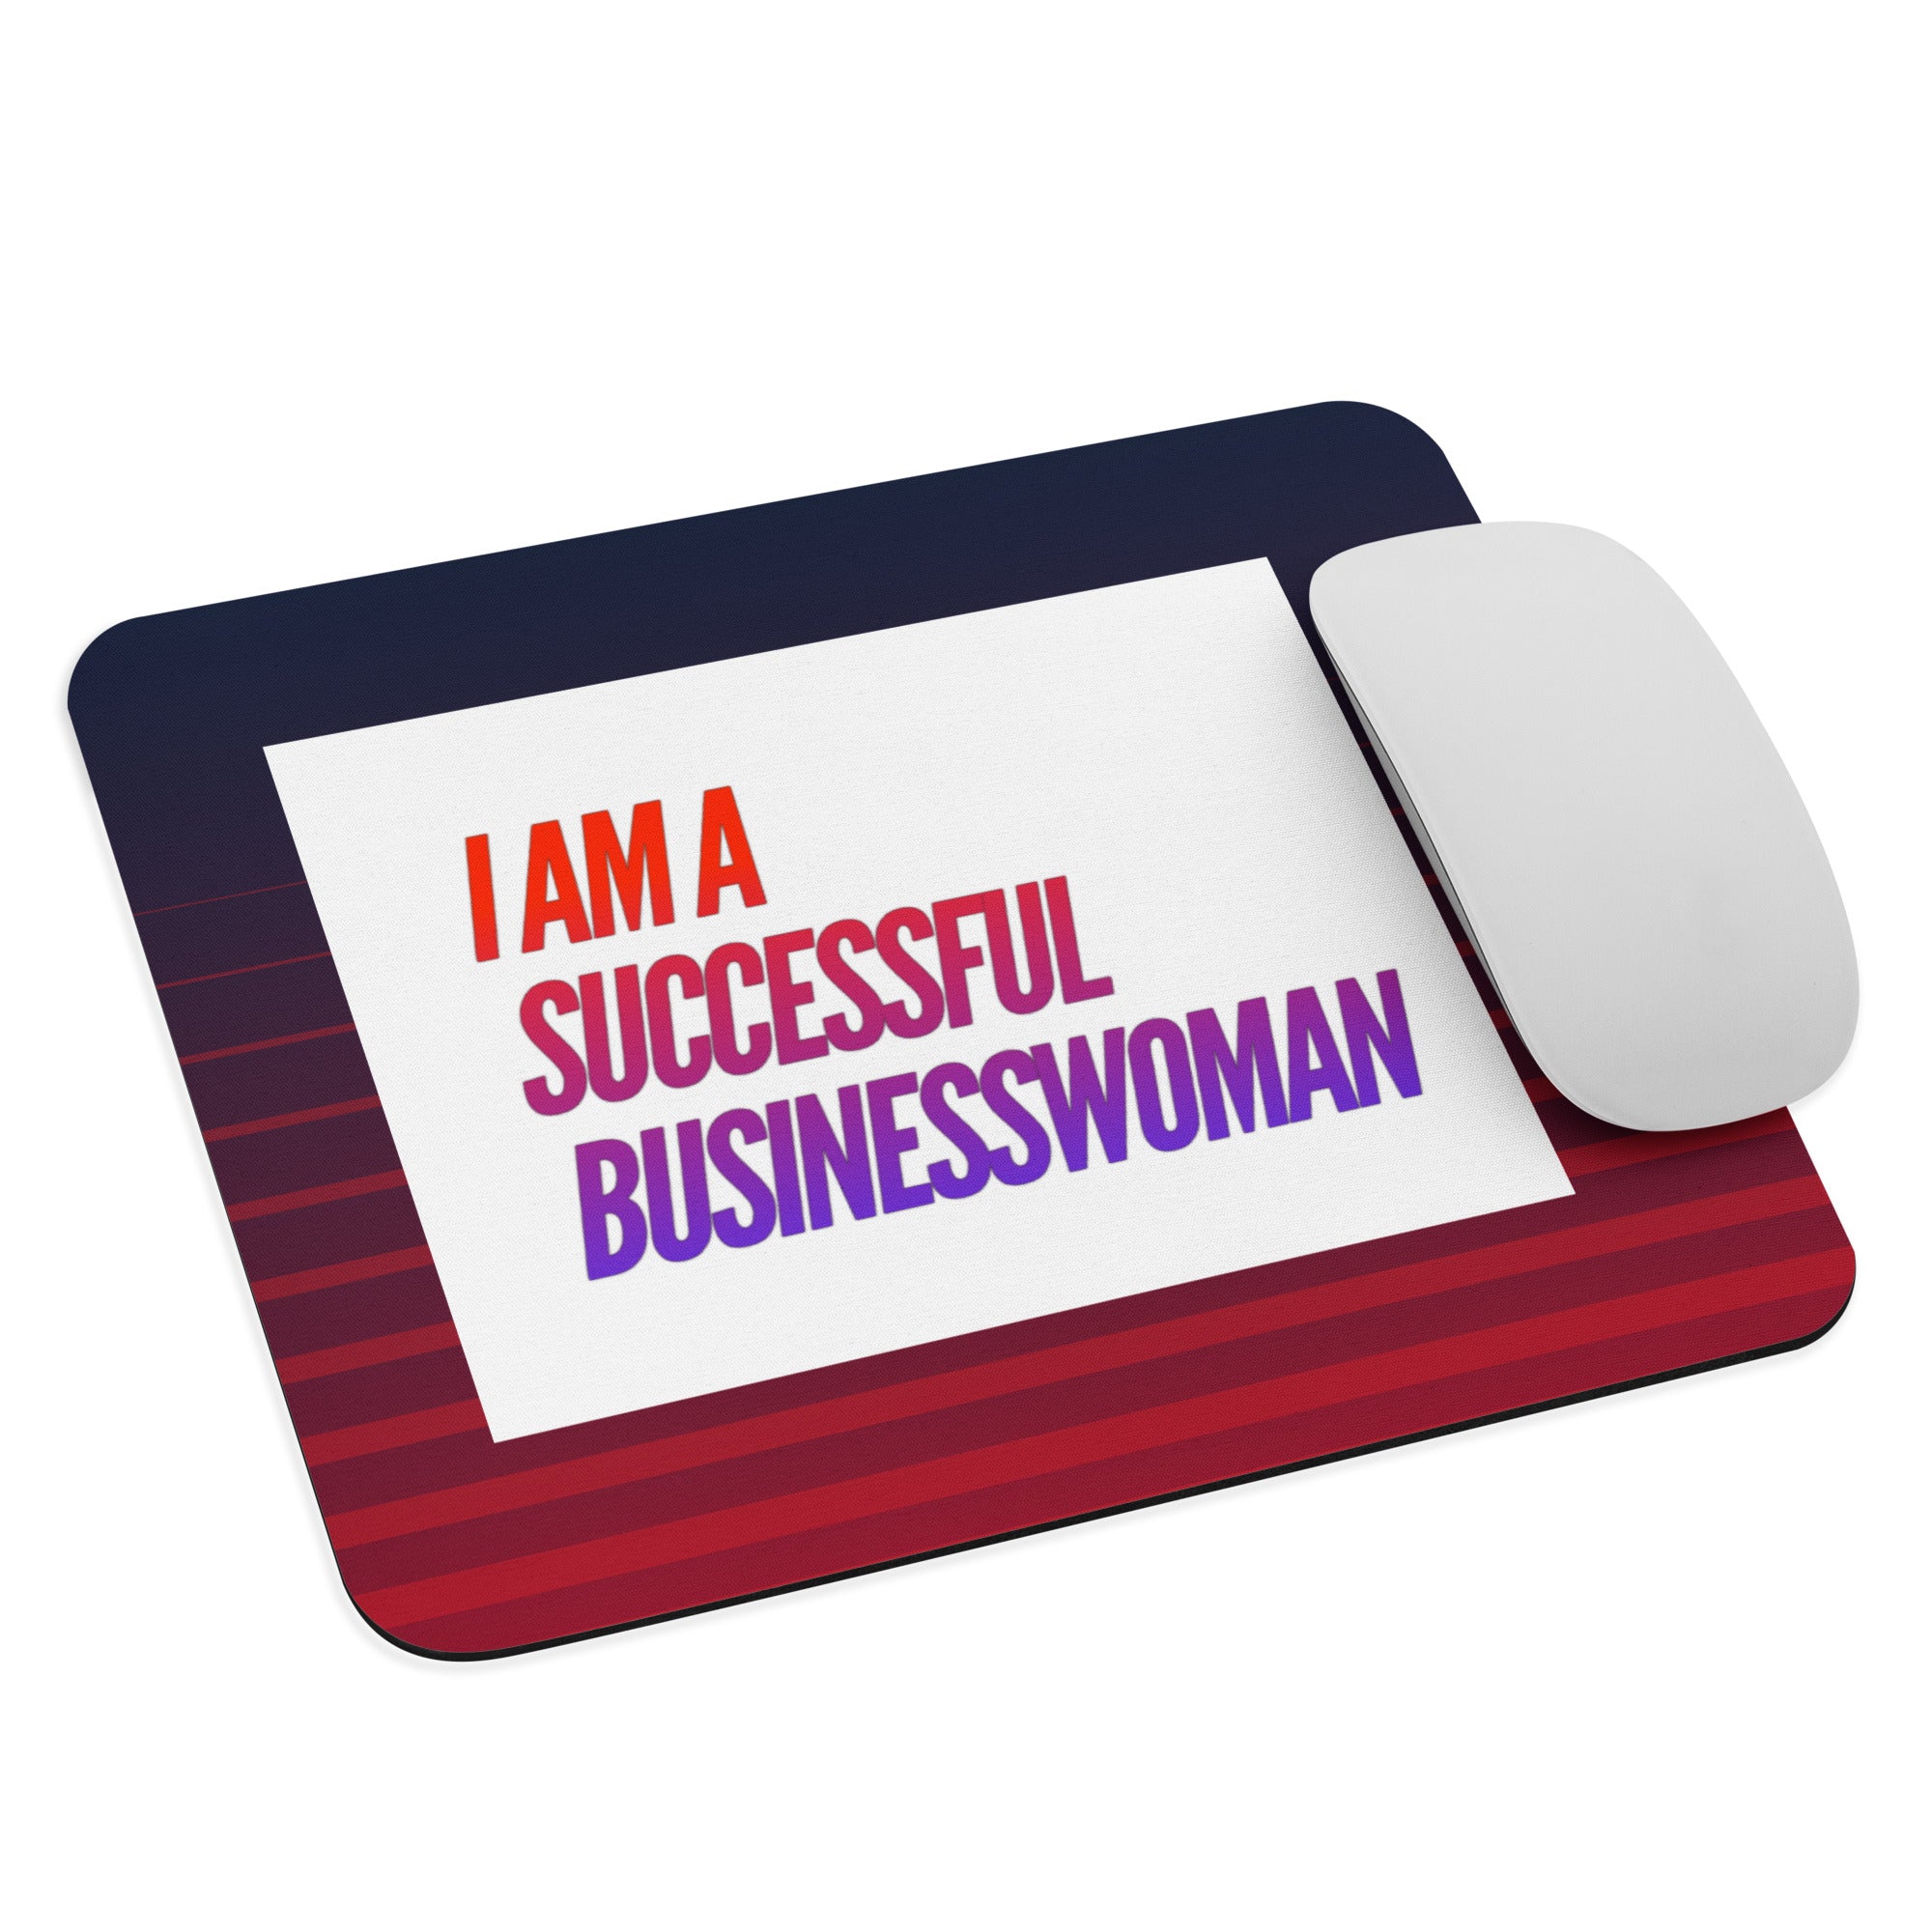 GloWell Designs - Mouse Pad - Affirmation Quote - I Am a Successful Businesswoman - GloWell Designs